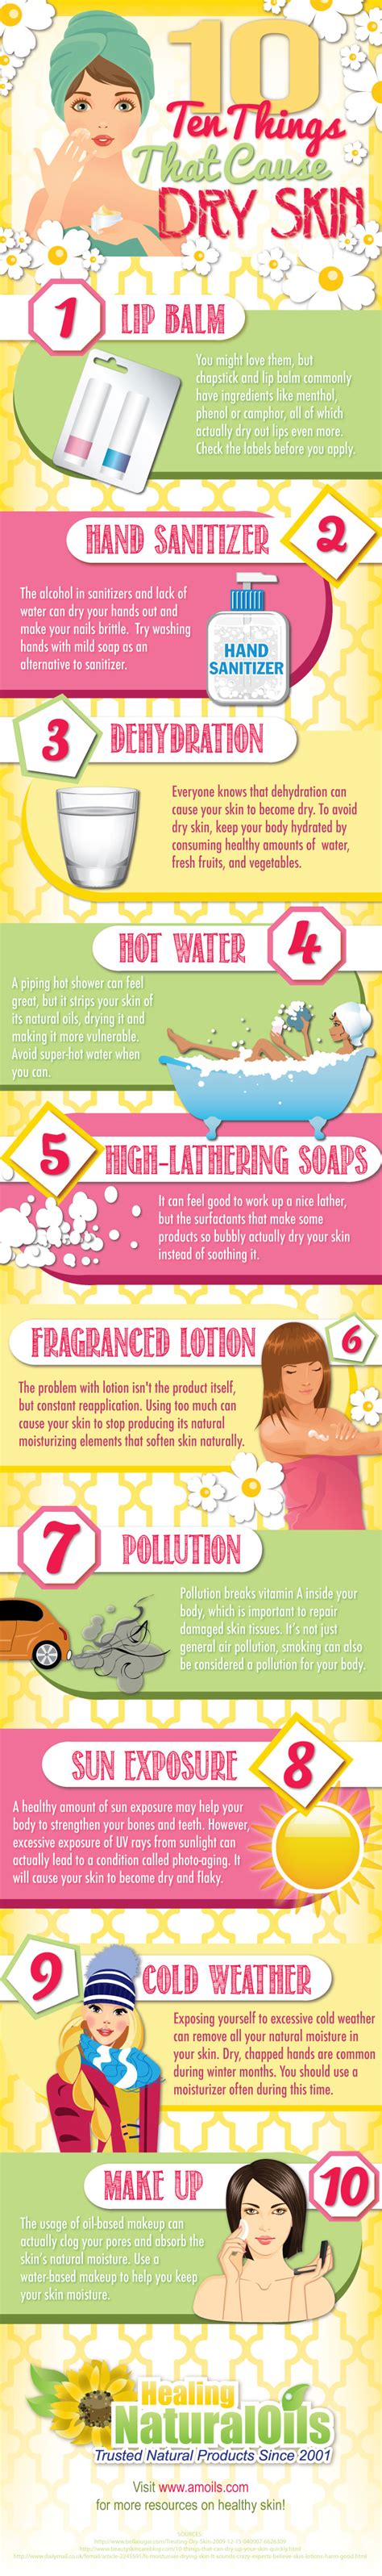 Dry Skin Here Are 10 Things That Might Be The Cause Infographic